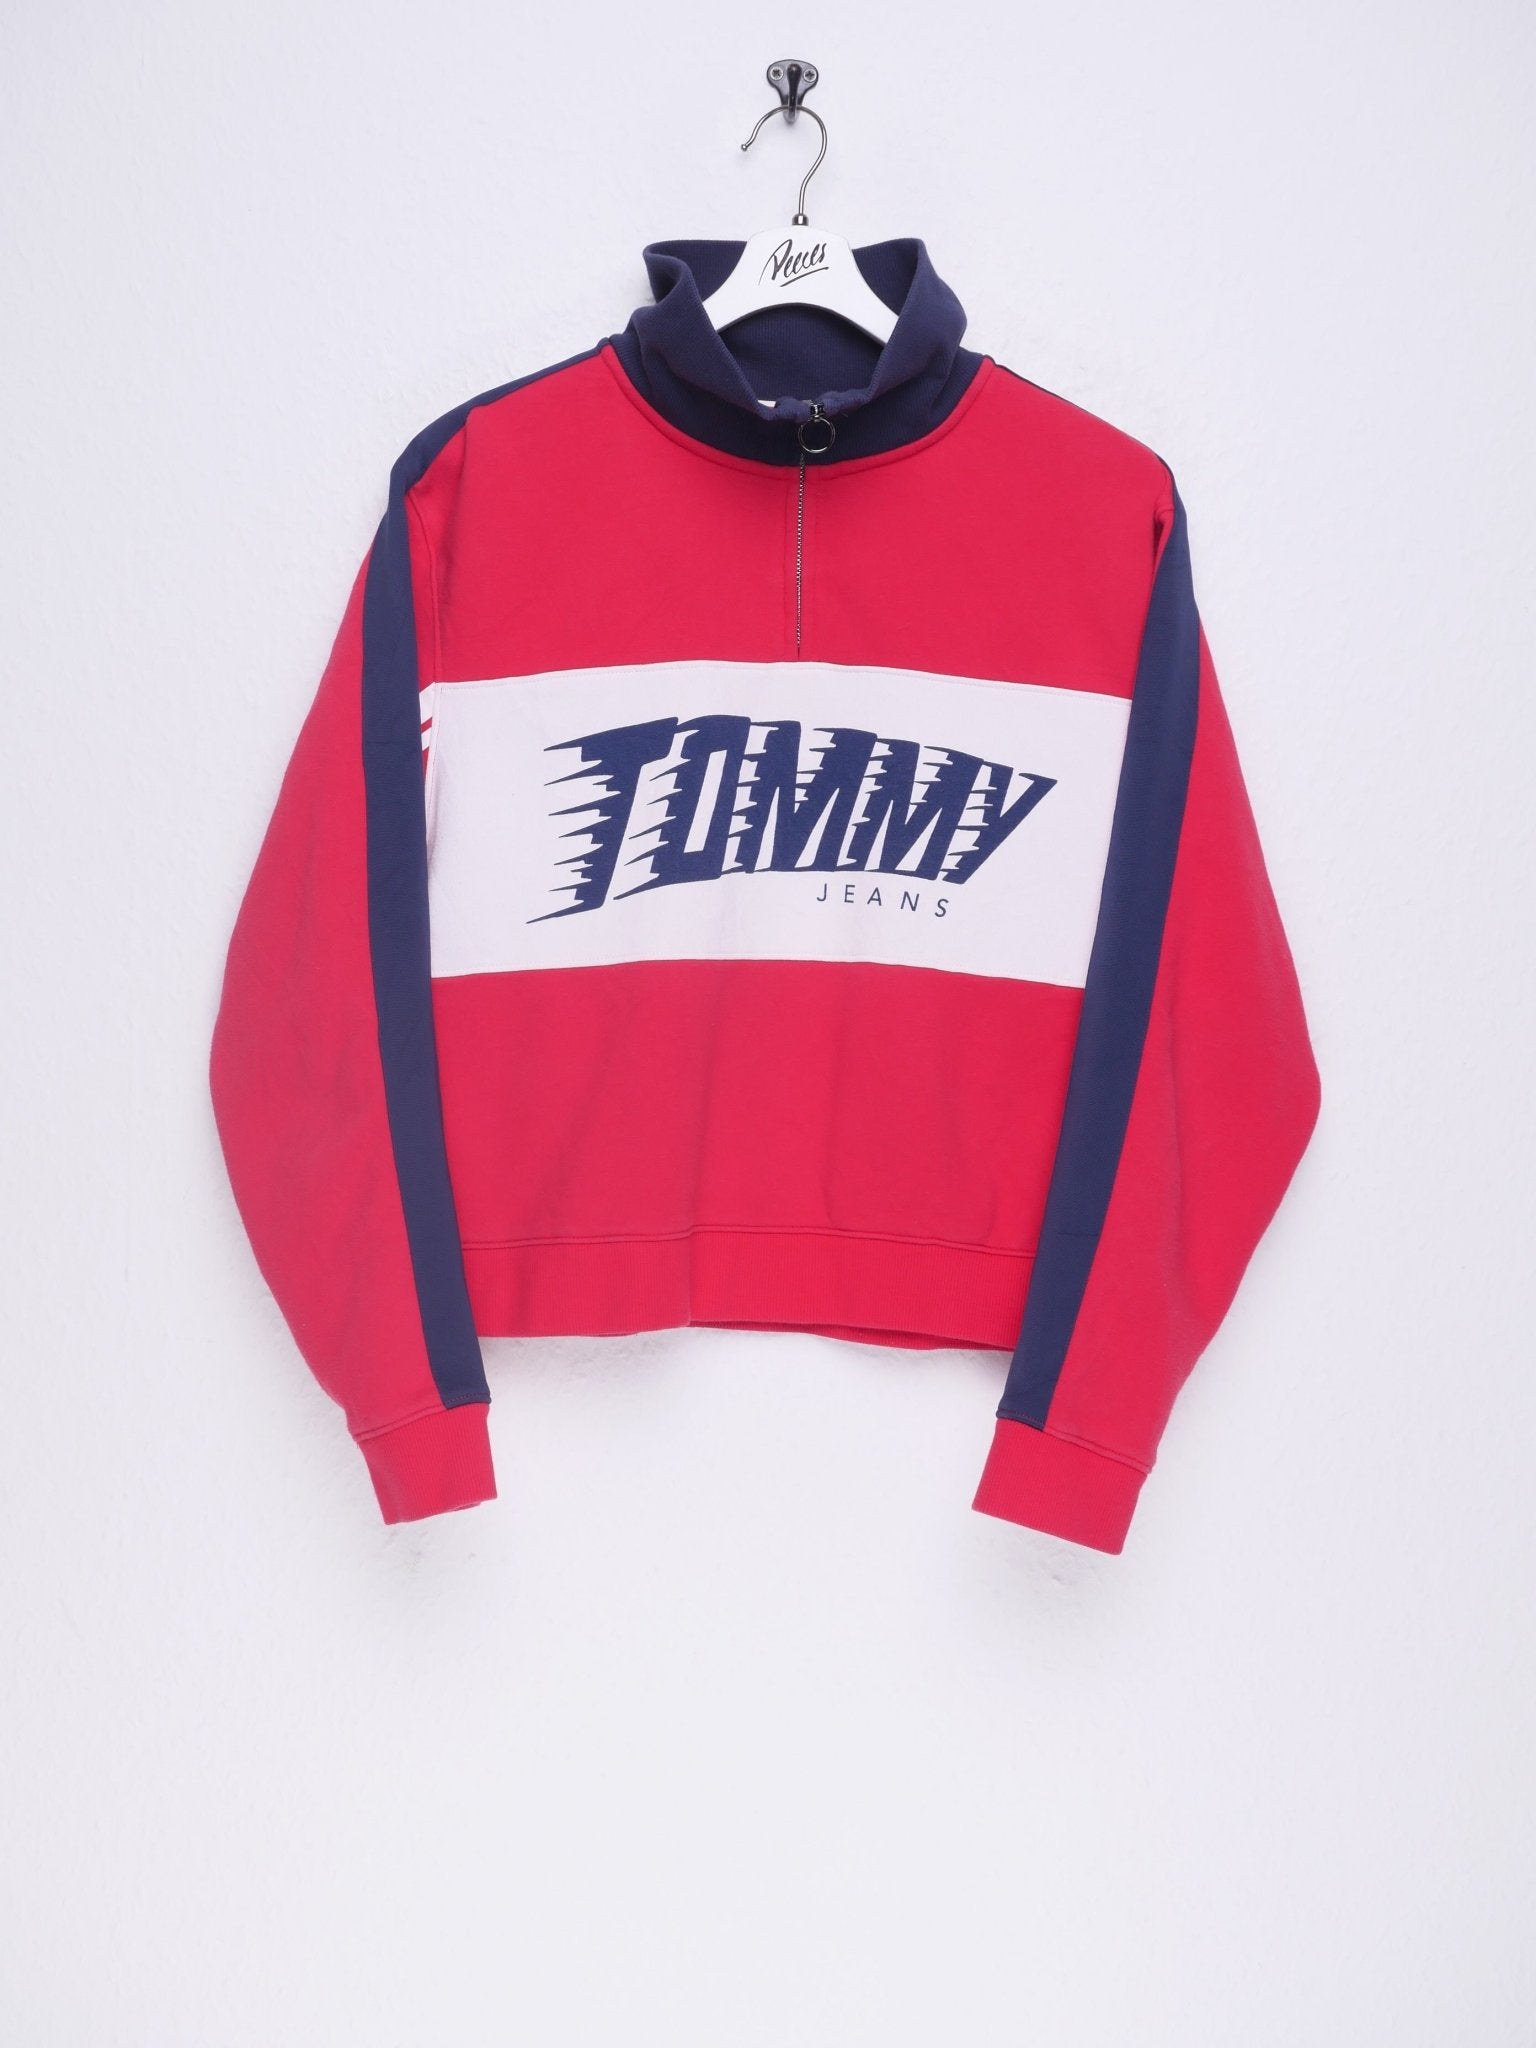 Tommy Hilfiger printed Spellout three toned Half Zip Sweater - Peeces